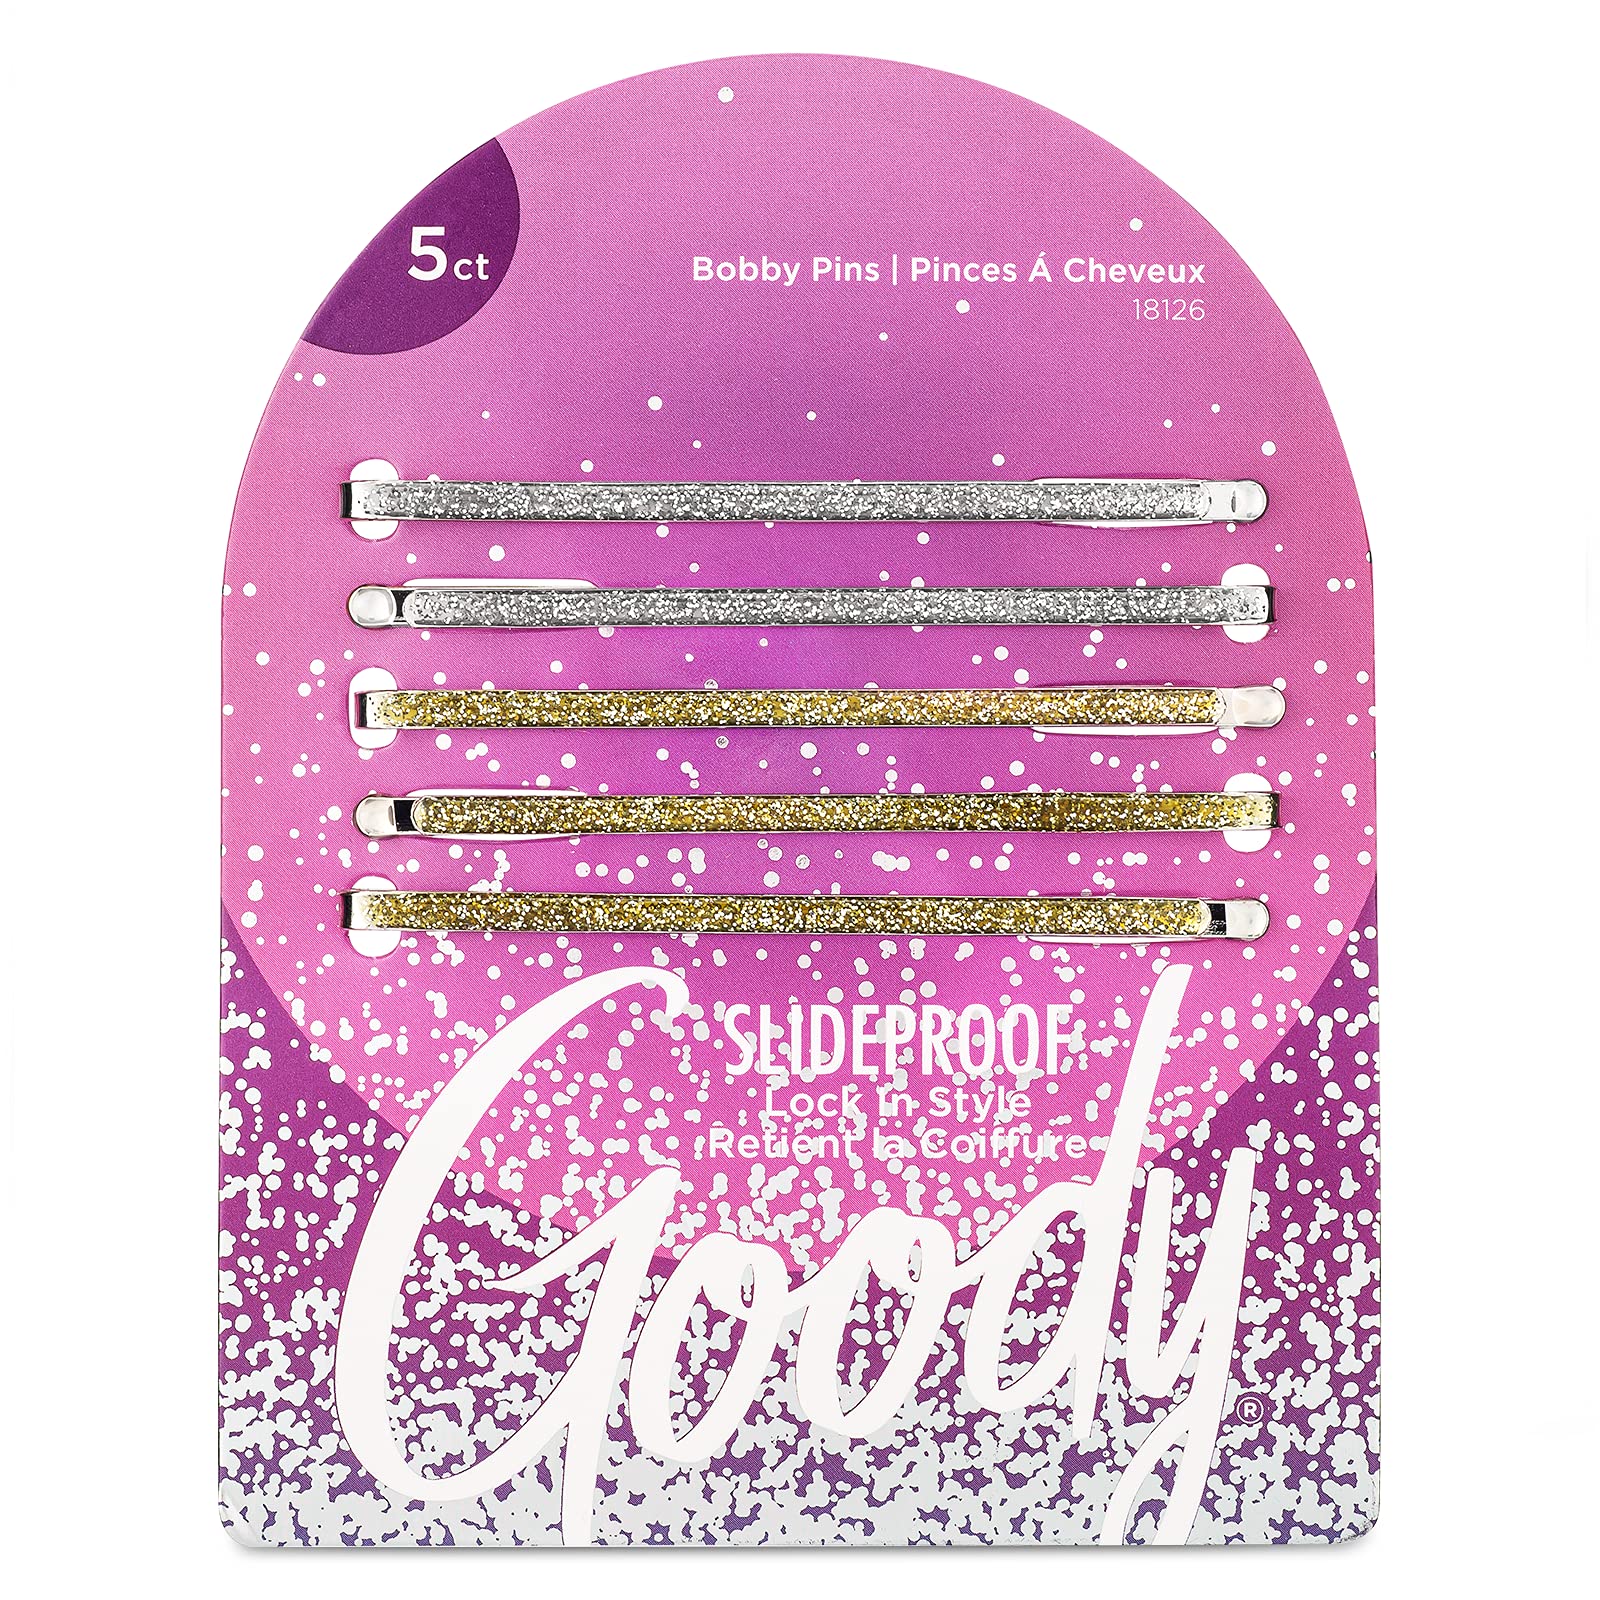 Goody Holiday Ball Enameled Bobby Pin Set - 5 Count Silver and Gold UPC:041457181263 PACK:72/3